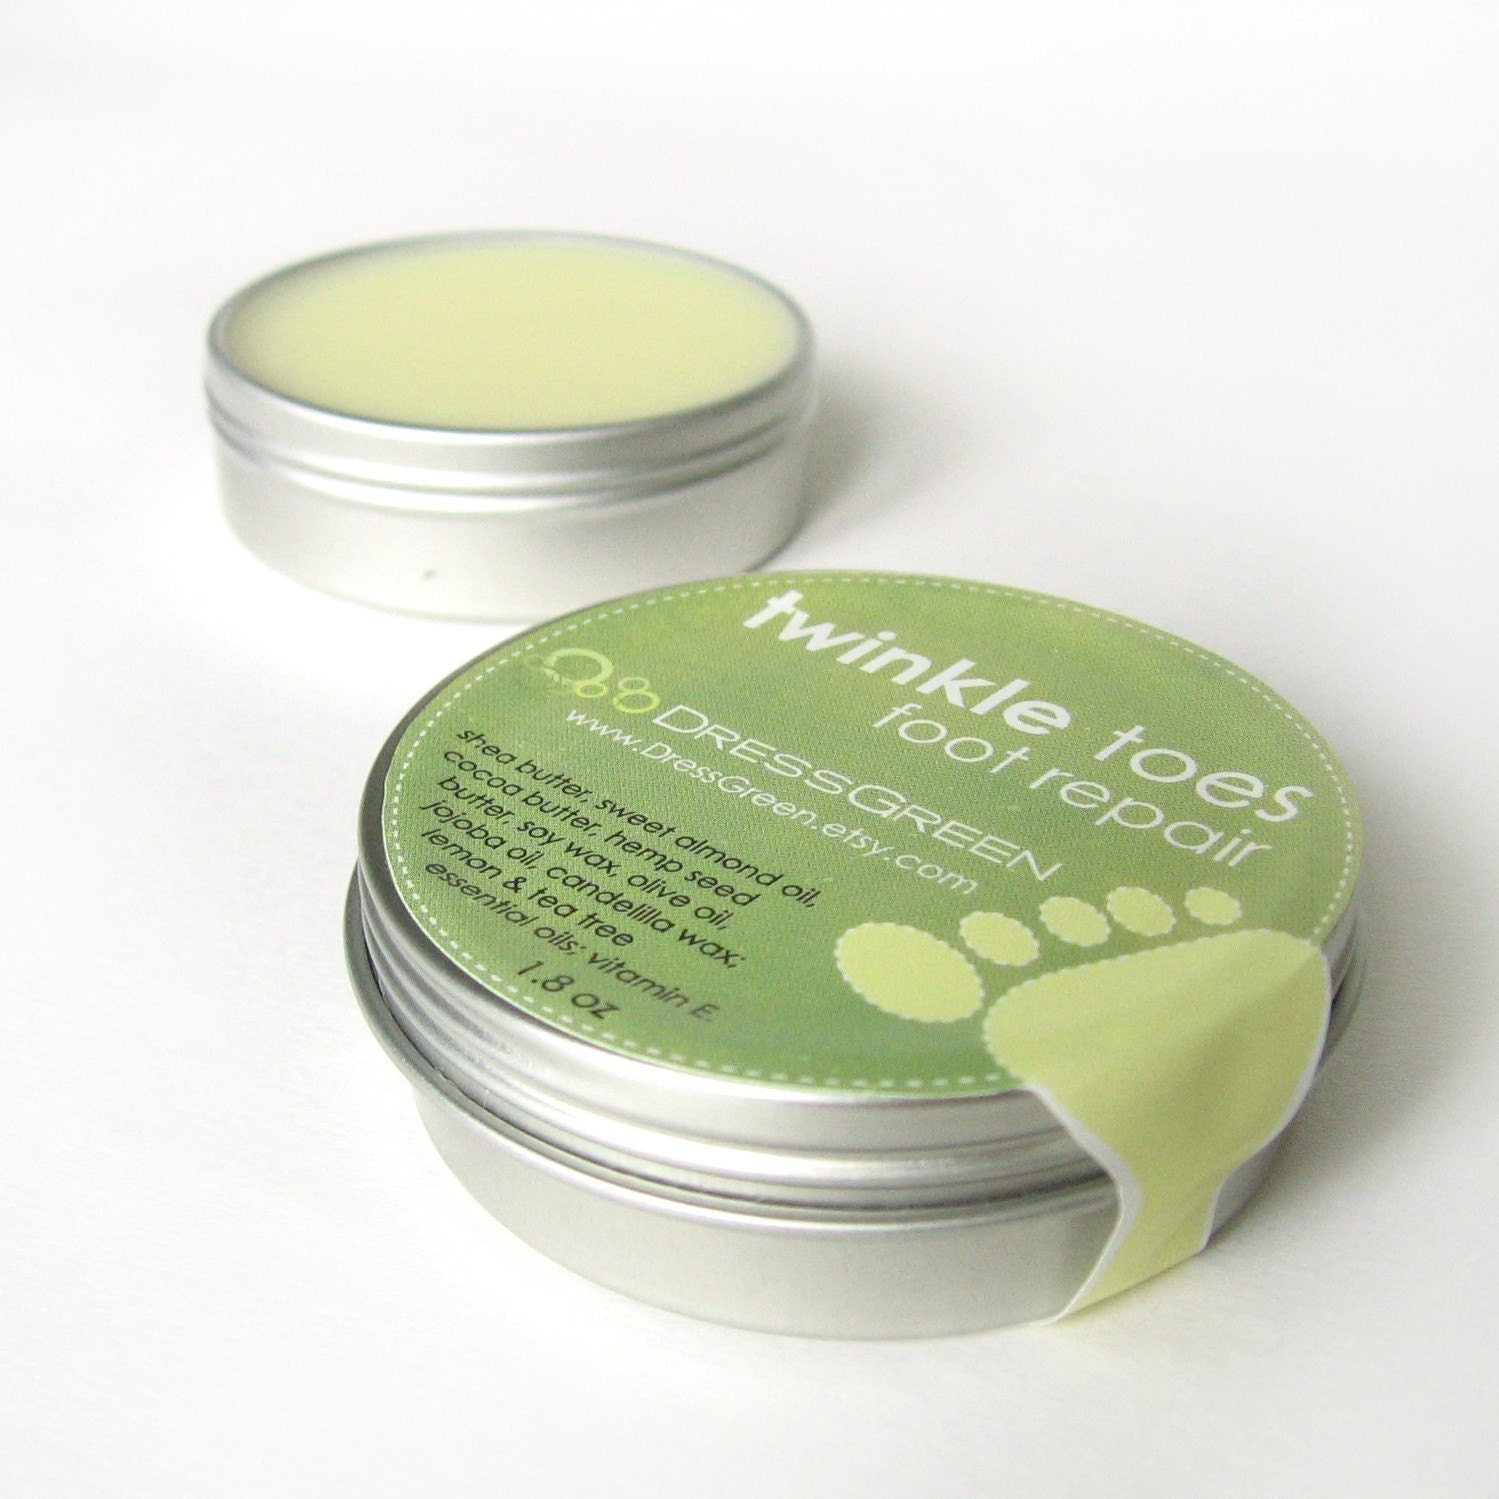 Twinkle Toes Foot Repair - A Natural Balm for Happy Feet